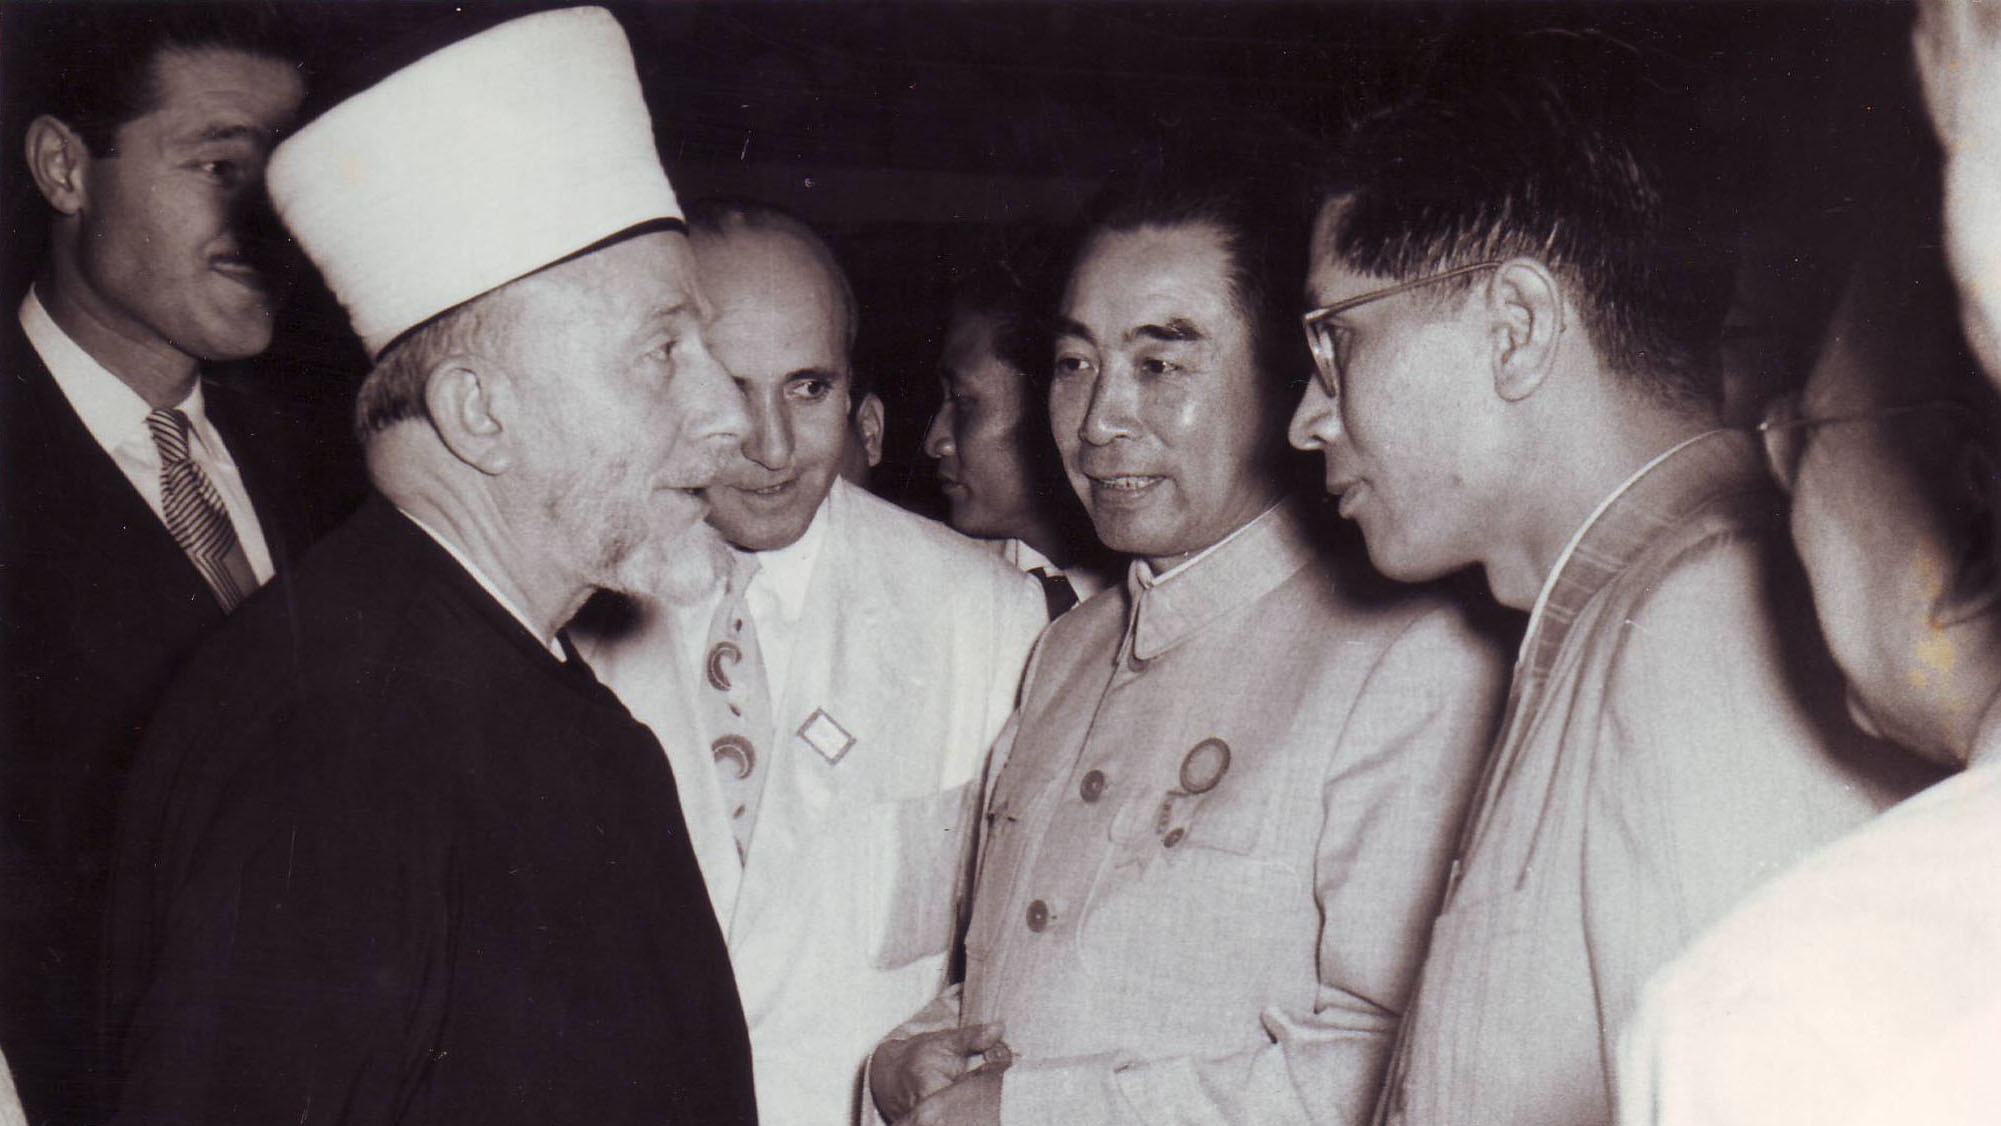 A participant of the observer delegation, Grand Mufti Haj Amin el-Husseini has a conversation with the Prime Minister of the People Republic of China, Zhou Enlai at the Bandung Conference on 16 April